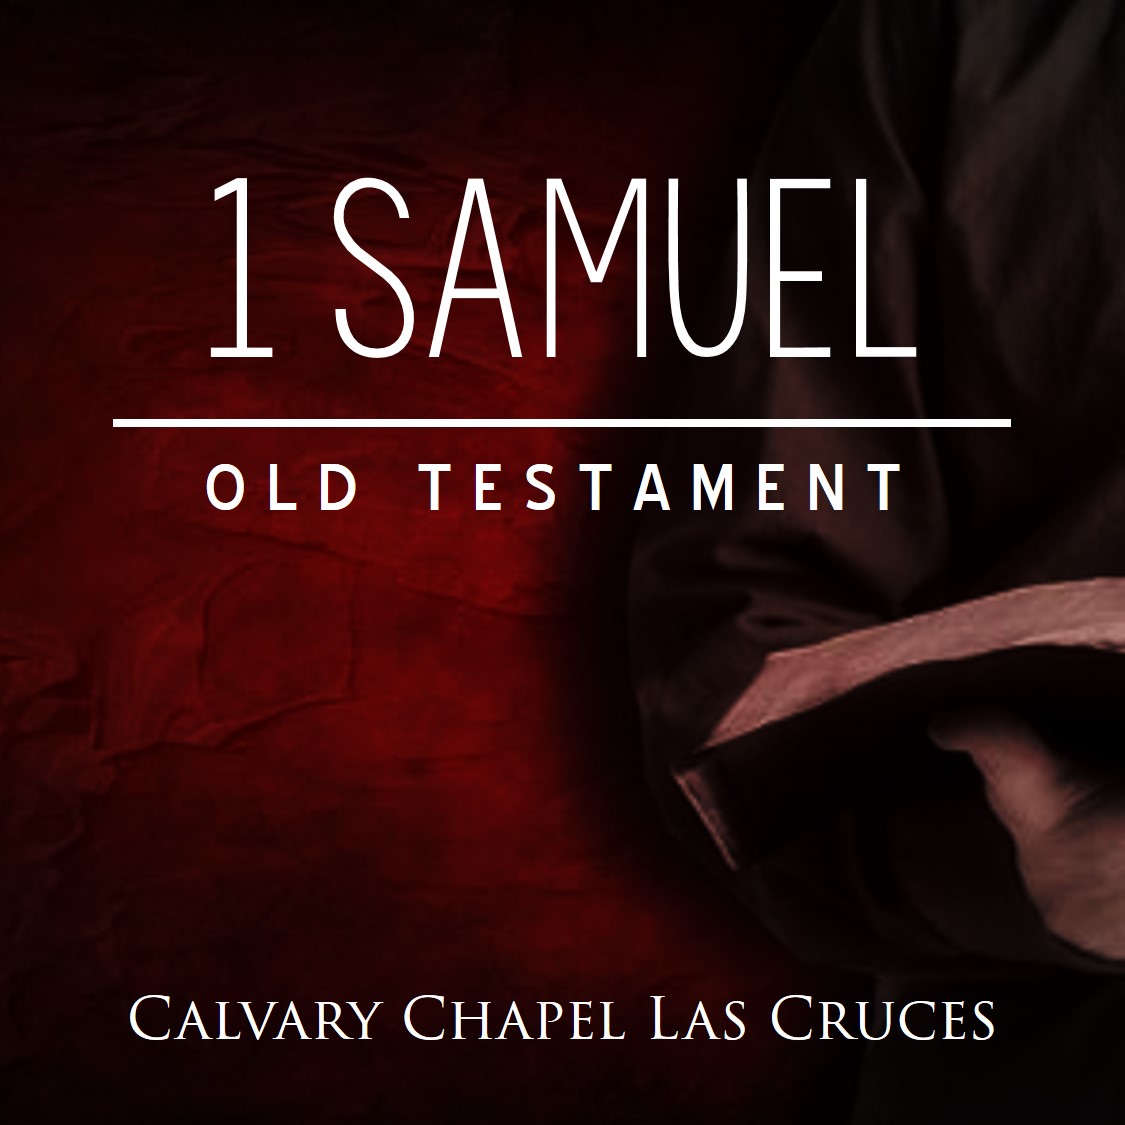 1 Samuel Chapter 17 - ”Young David vs Giant Goliath”